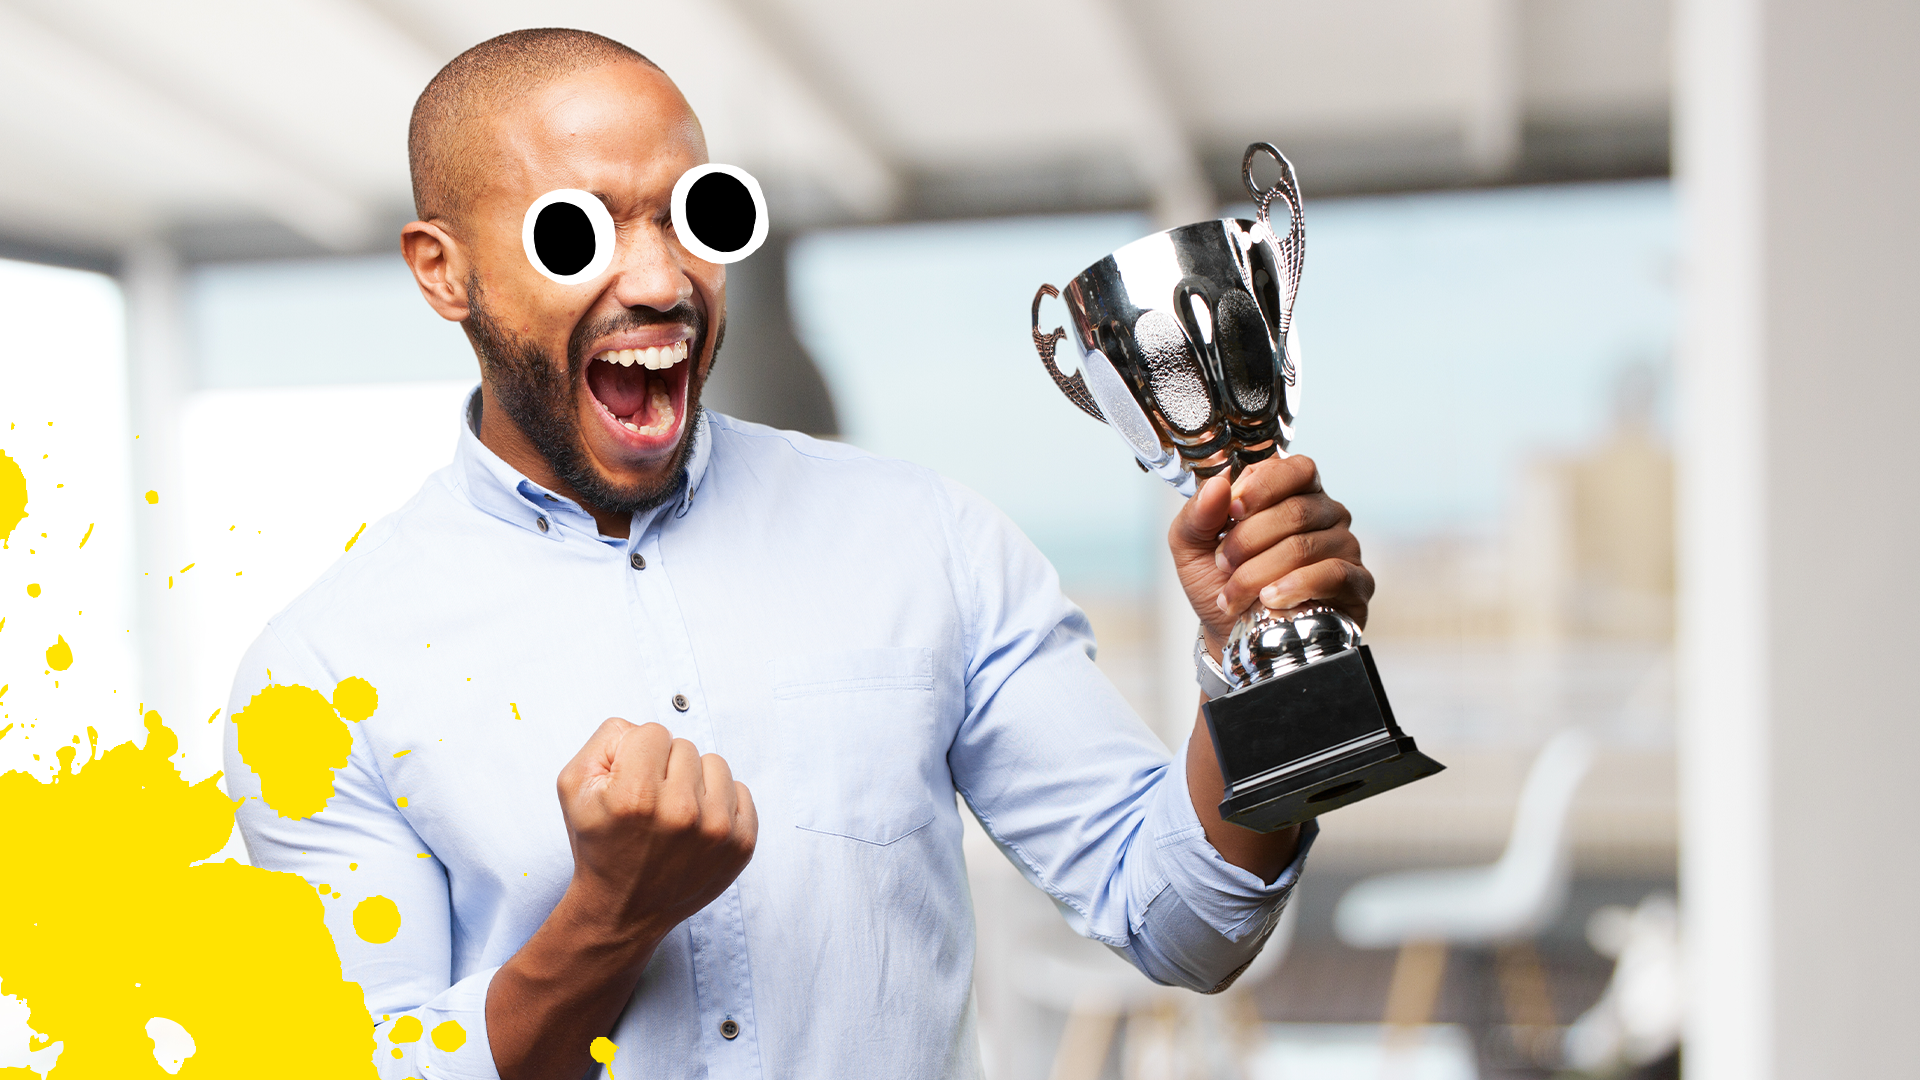 Man with trophy celebrating with yellow splat 